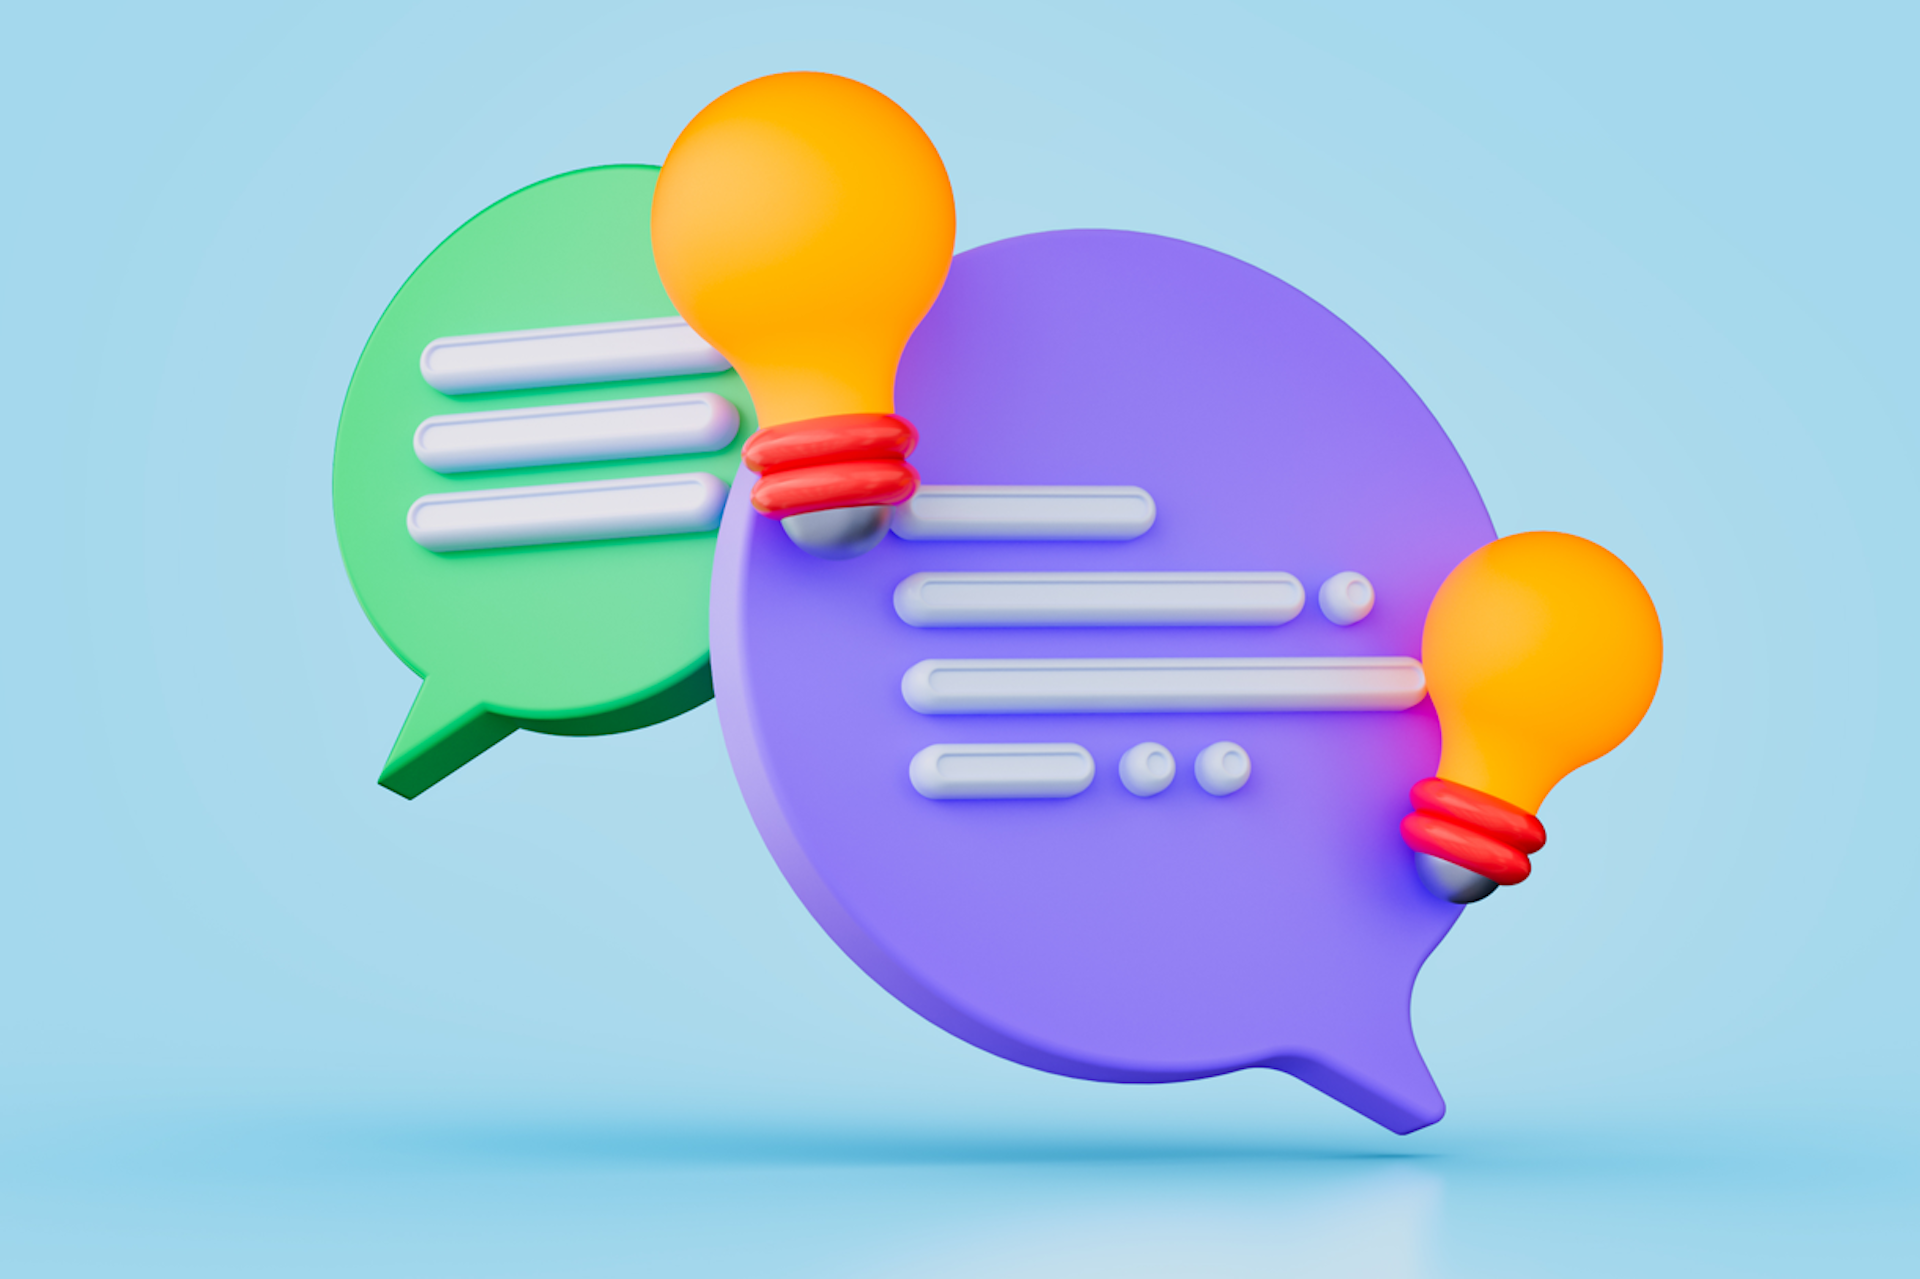 Two brightly colored speech bubbles, a smaller one in green and larger one in purple, with two bright orange light bulbs. Consumer insights ultimate guide.